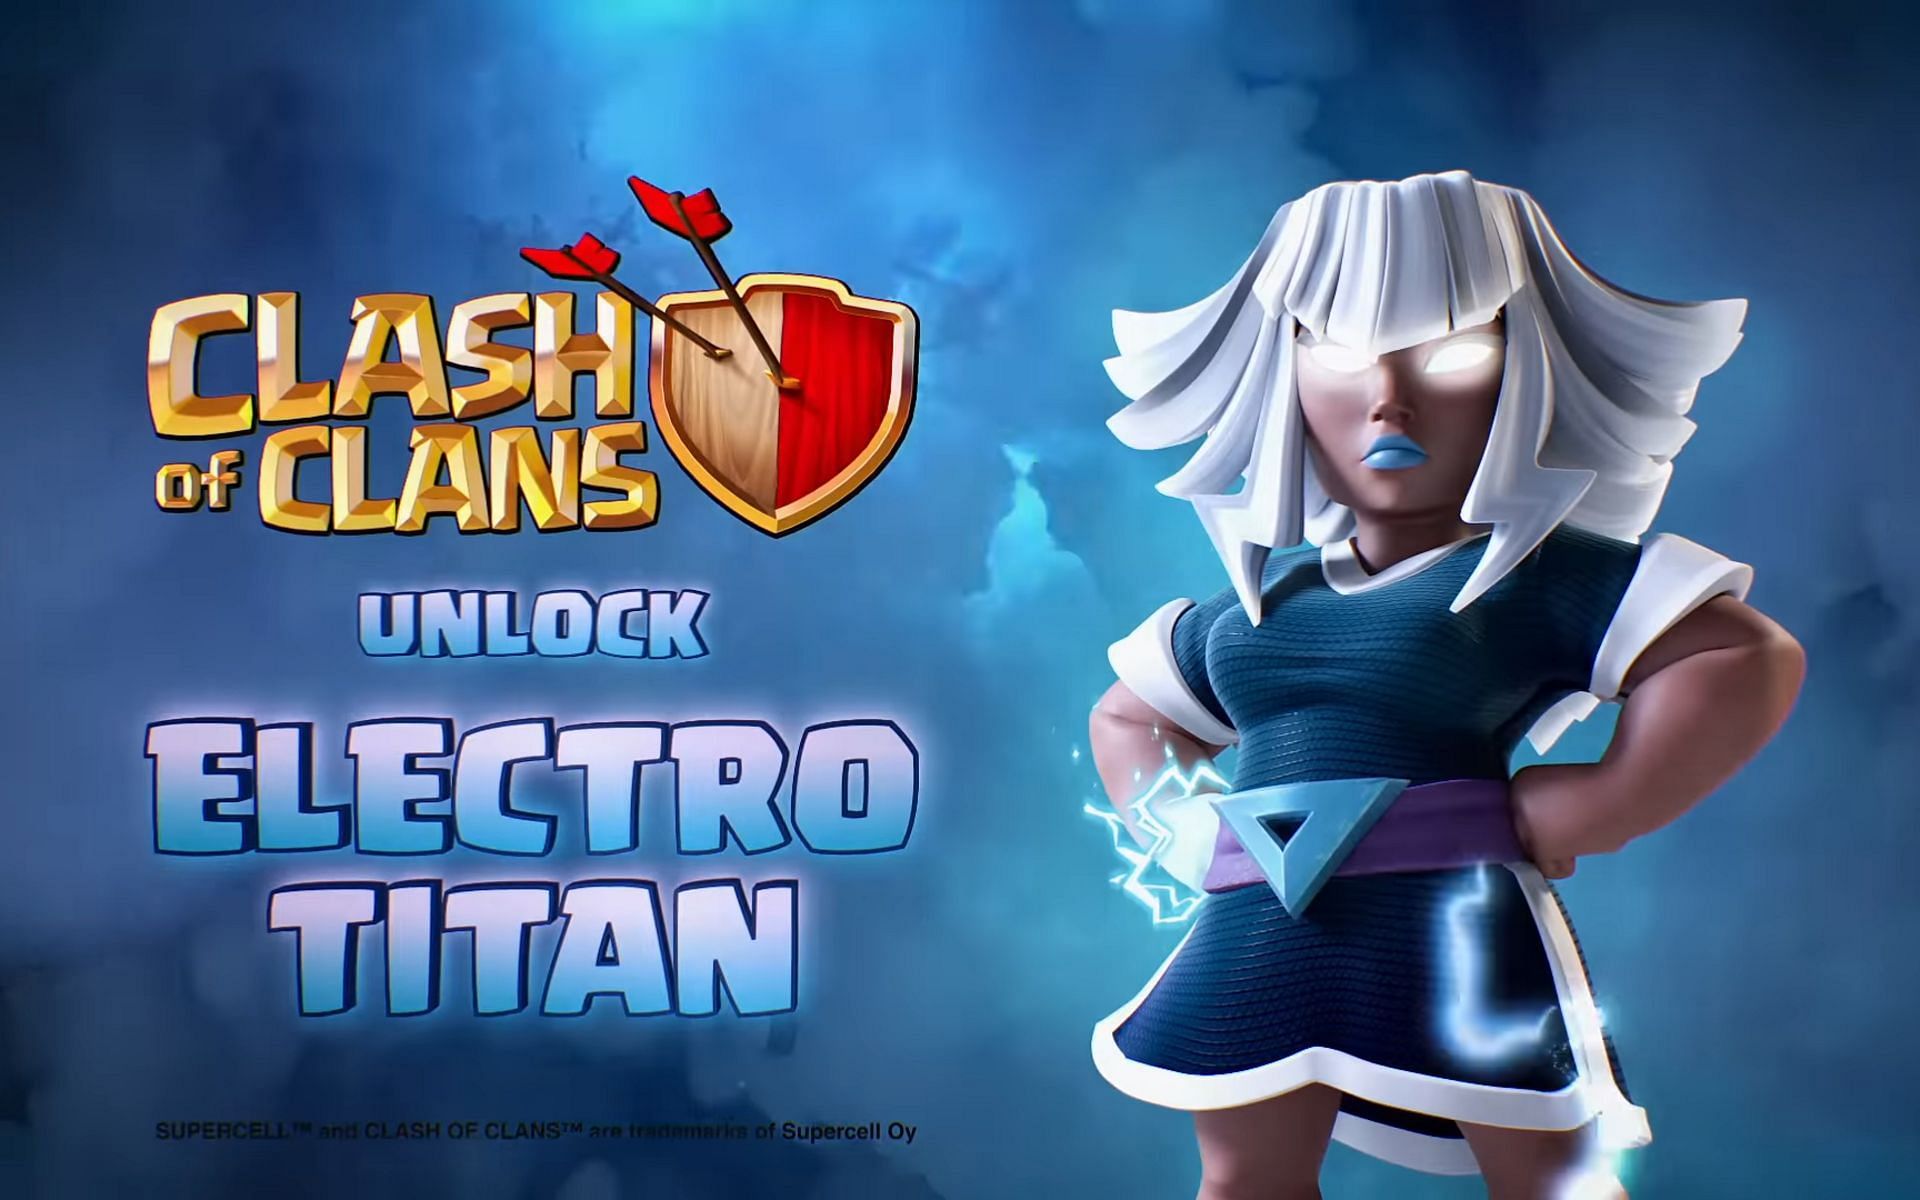 Electro Titan is now available in Clash of Clans (Image via Supercell)